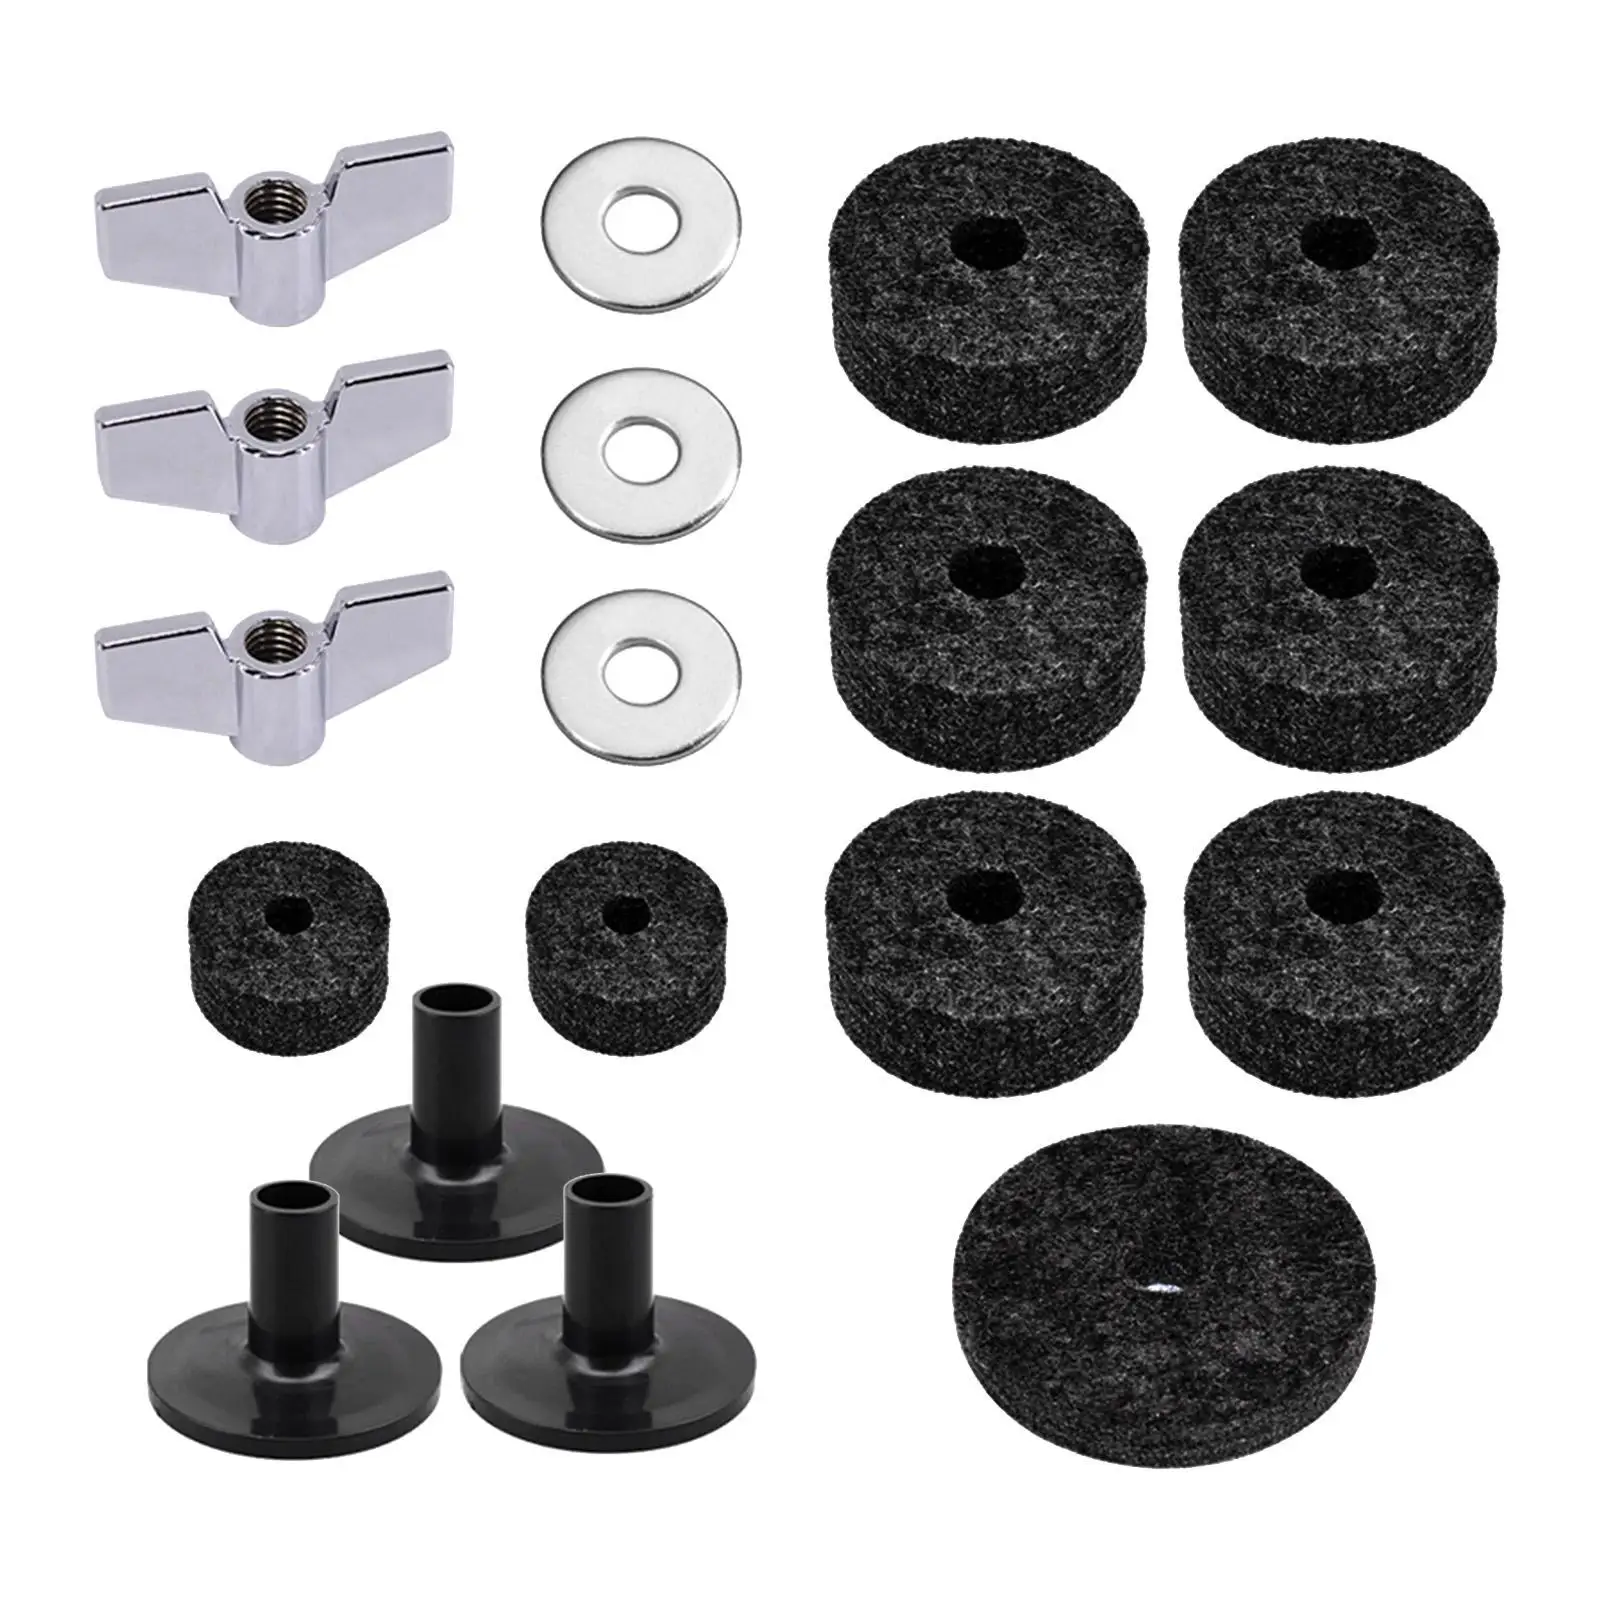 Replacement Cymbal Felt Washer Percussion Instruments, Cymbal Replacement, Drum Felt, Equipment for Performance Performer